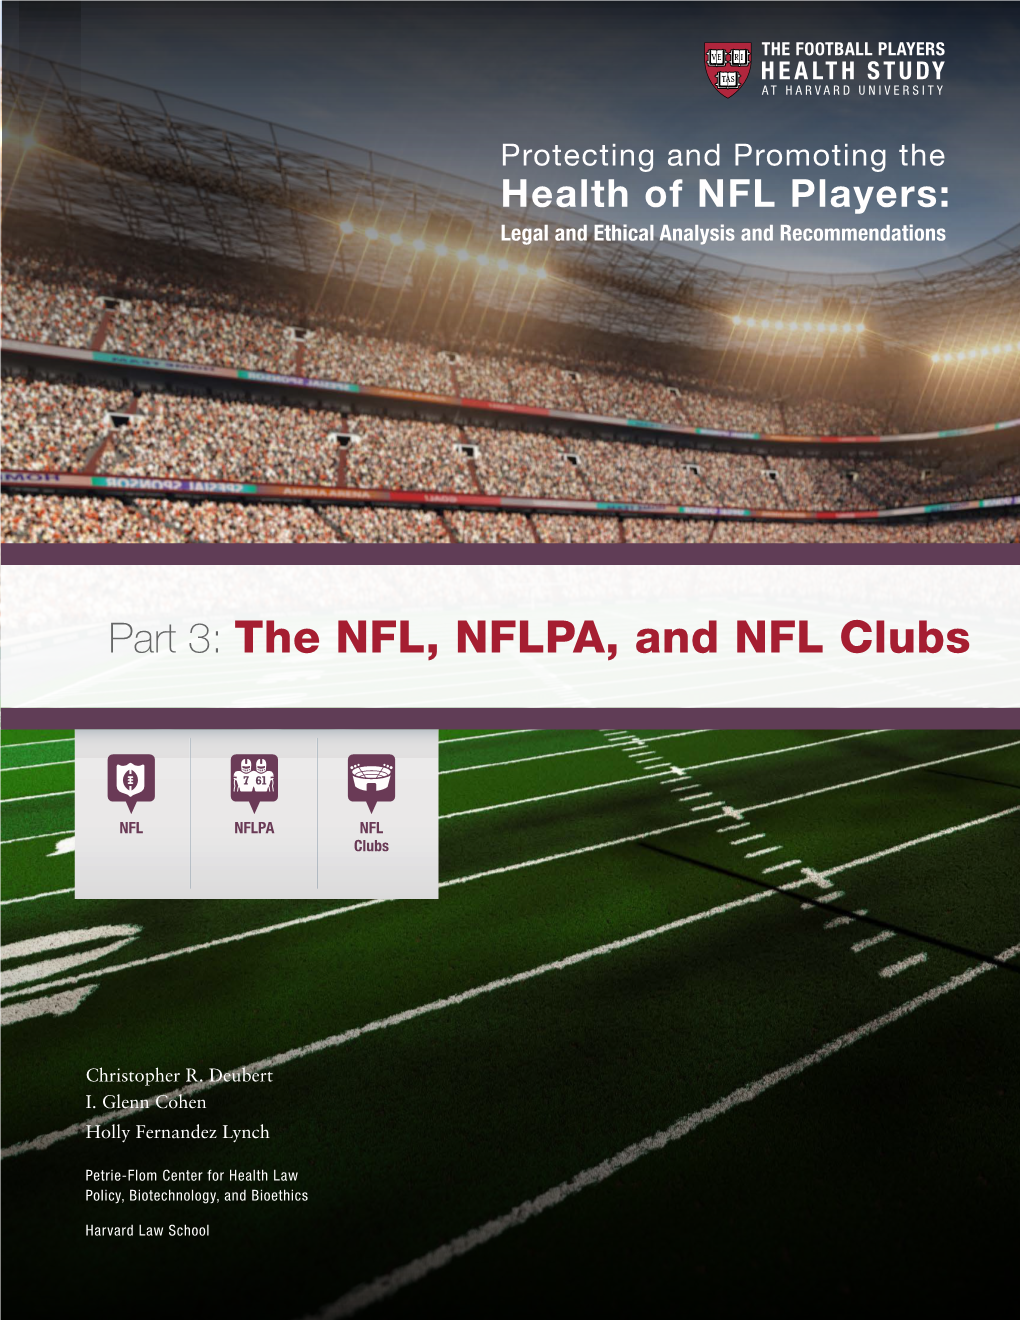 The NFL, NFLPA, and NFL Clubs